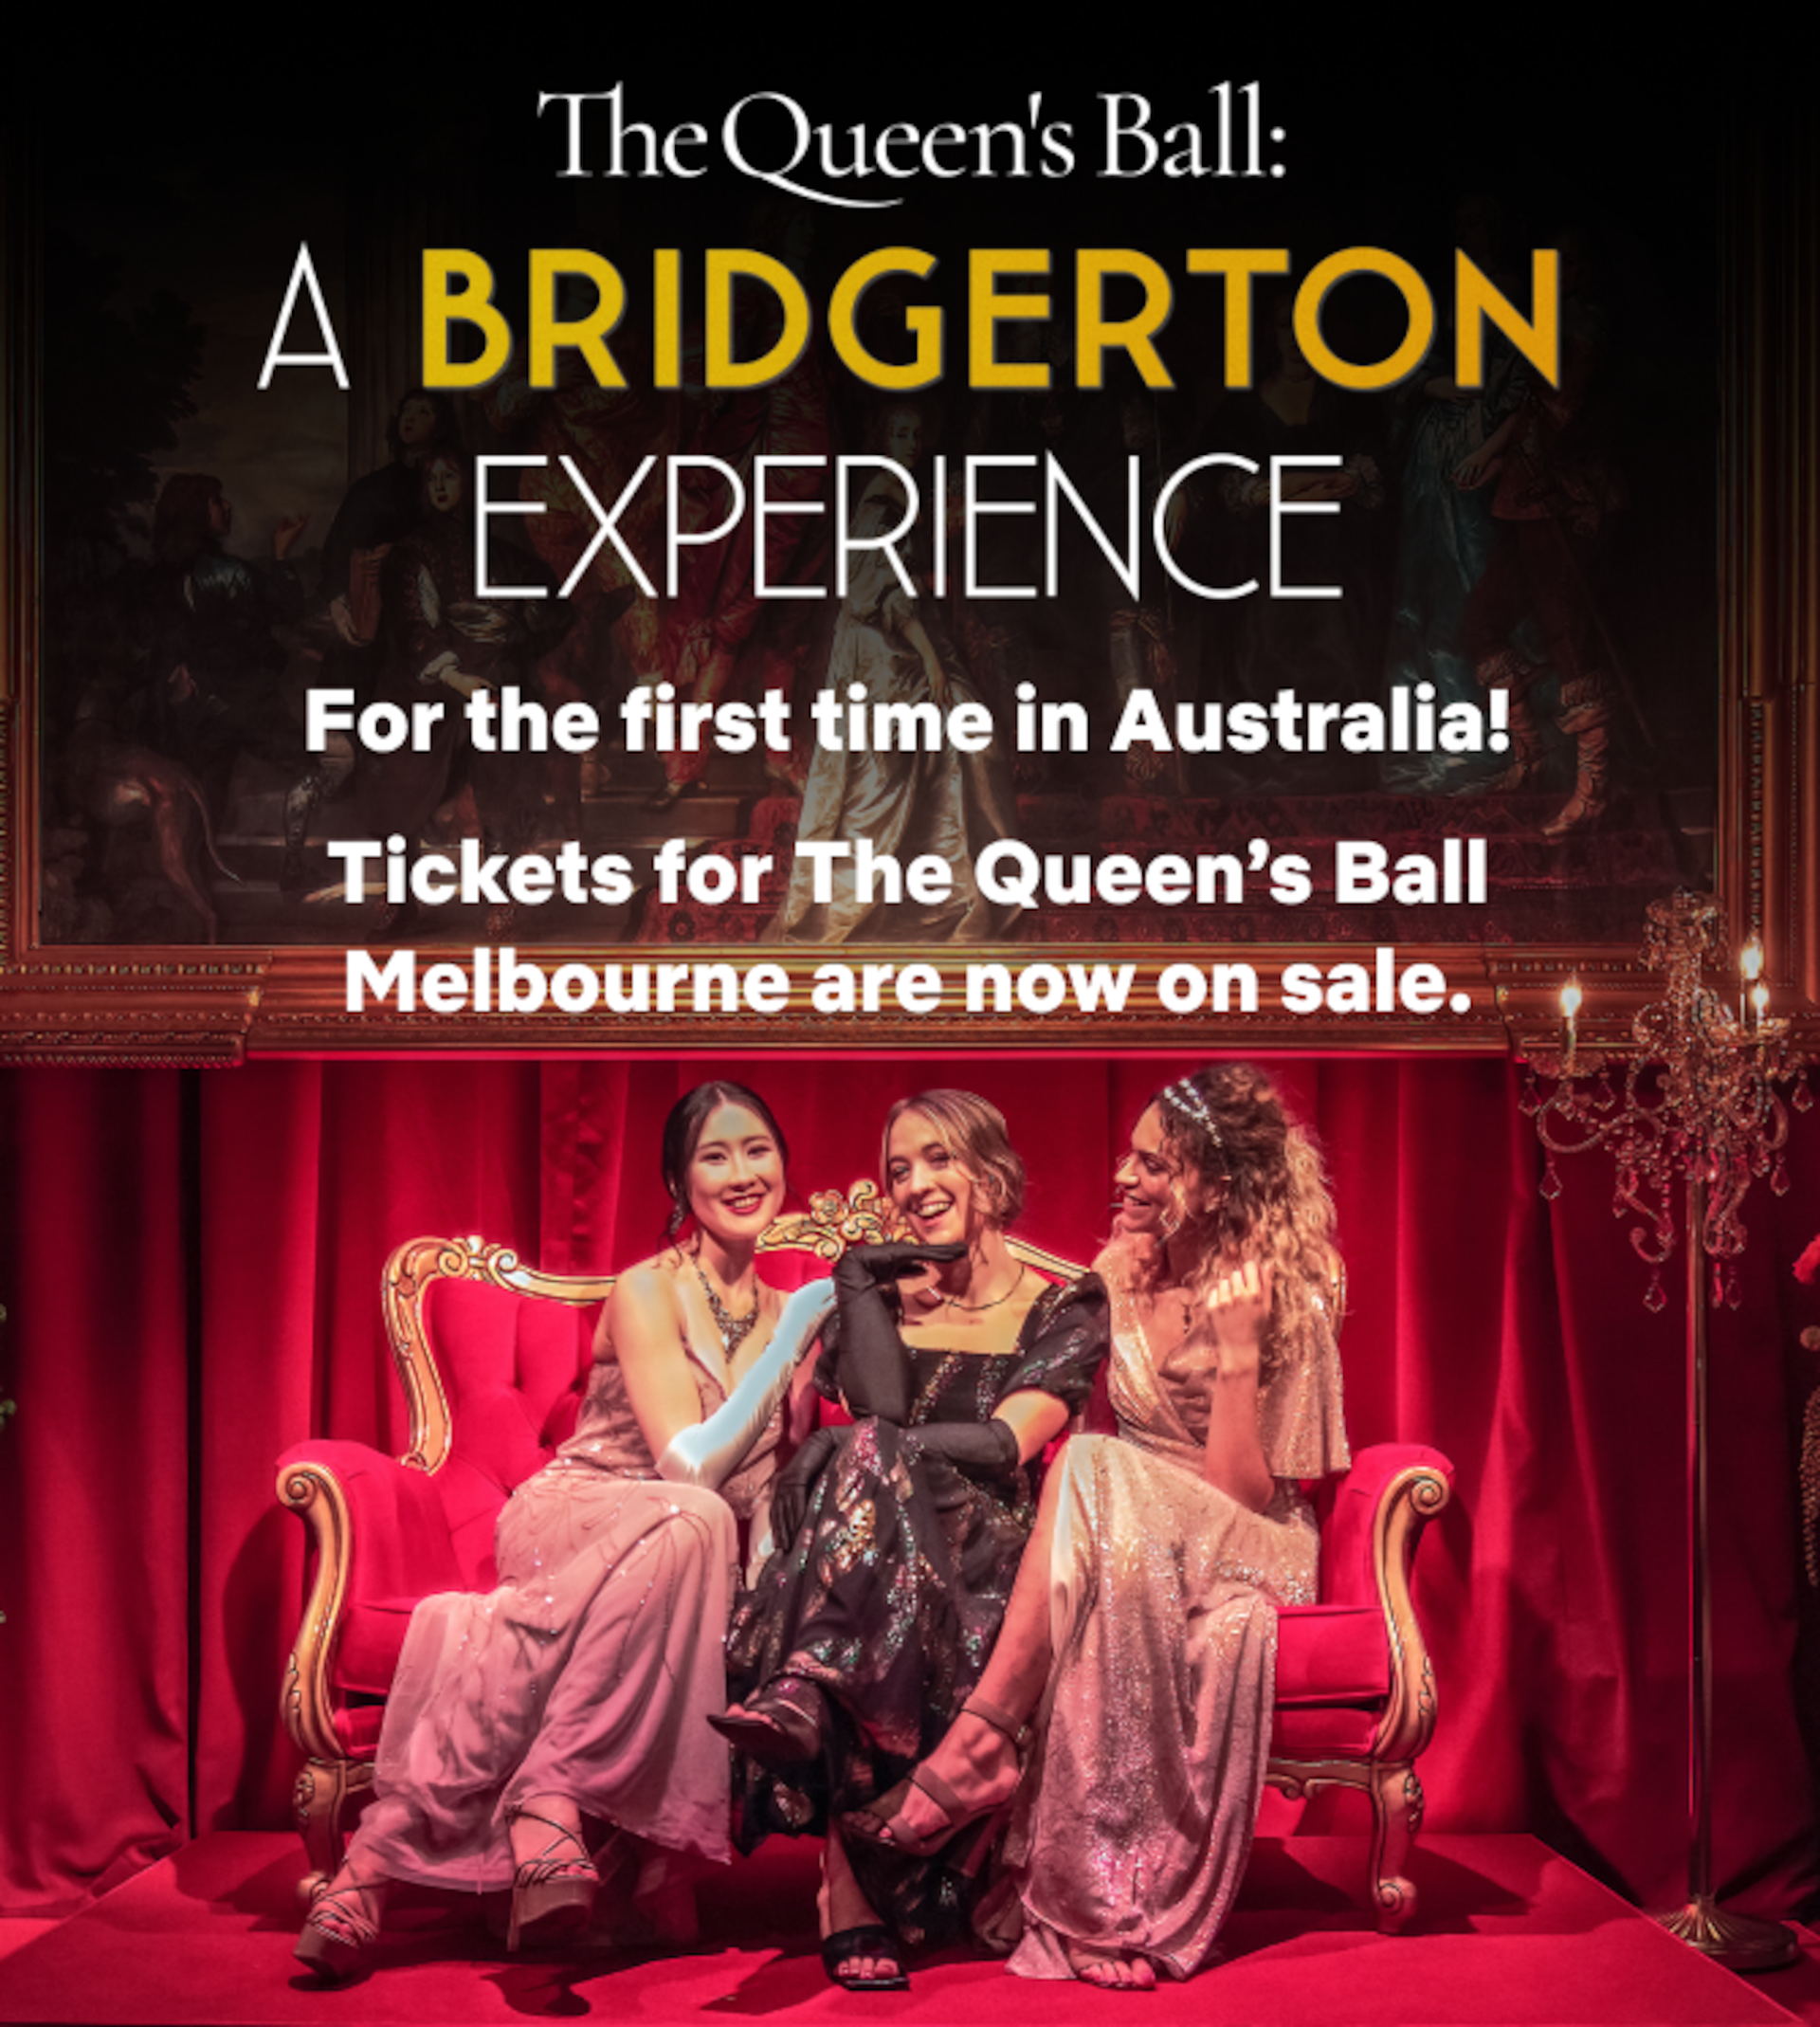 Three people sitting on a couch surrounded by red drapes 'The Queen's Ball A Bridgerton Experience - For the first time in Australia. Tickets for the Queen's Ball Melbourne are now on sale.'